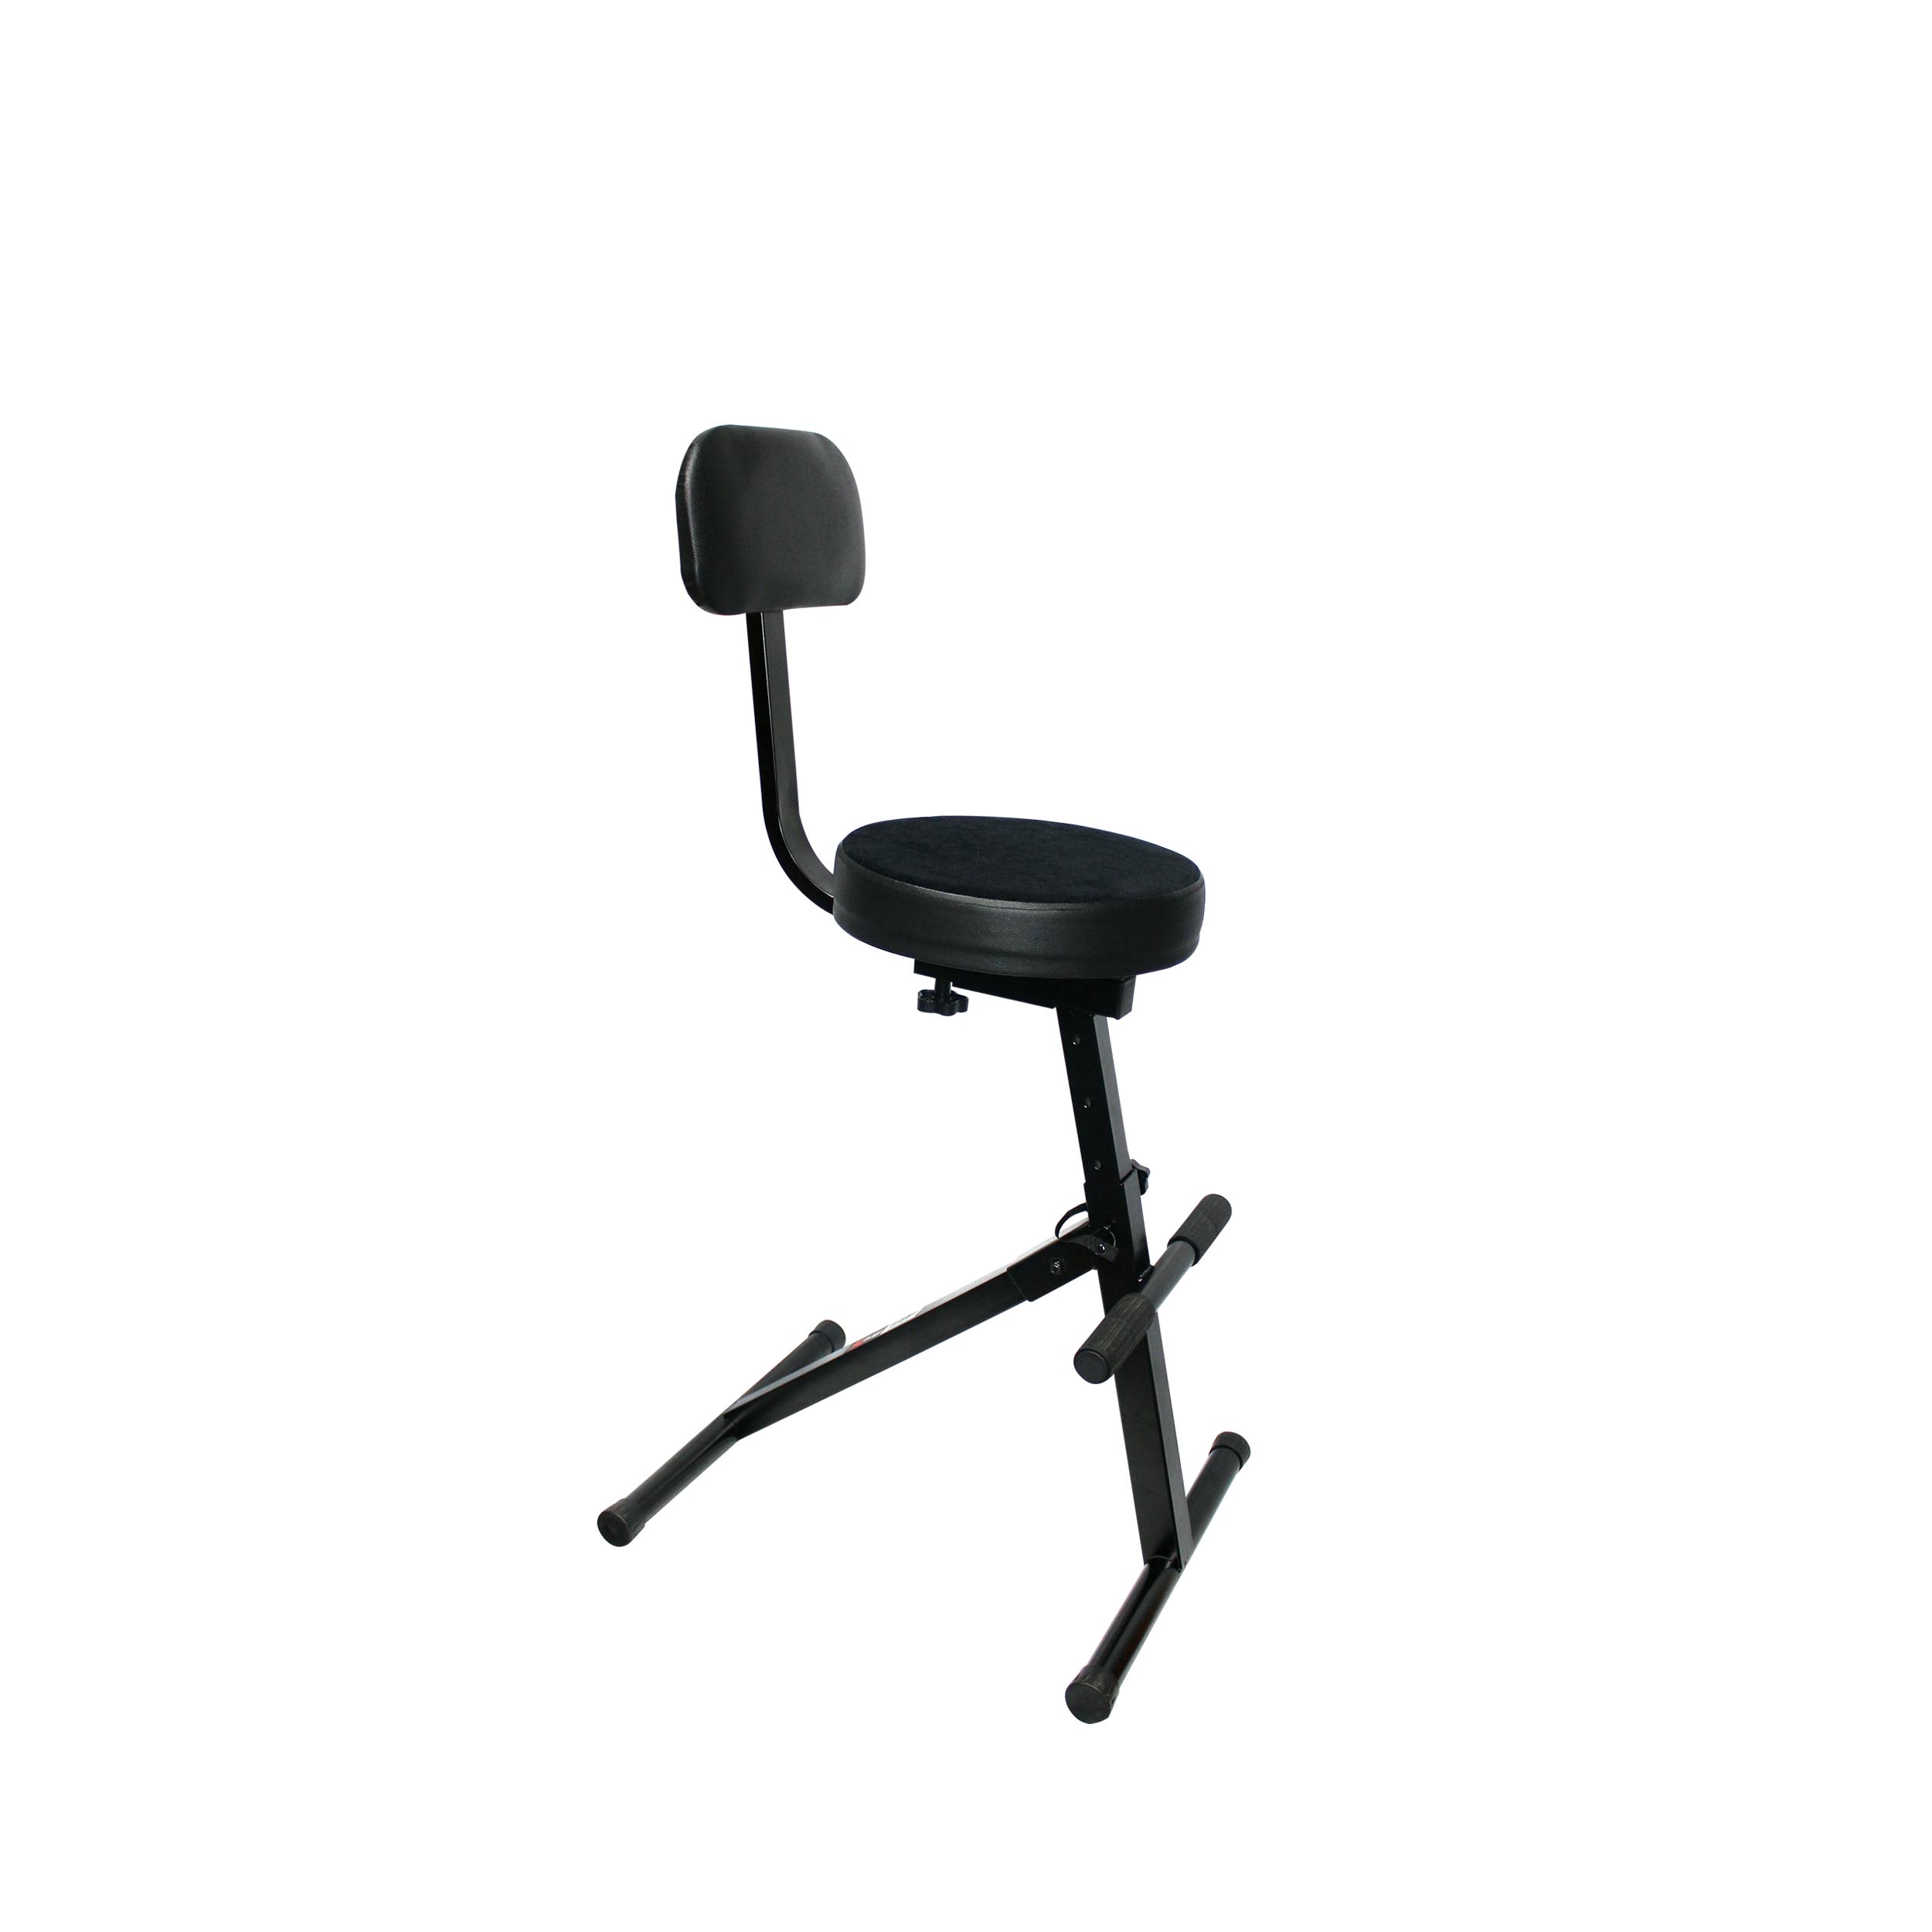 Glides and Heavy Nylon Base 21-31 Height Adjustment 450 lbs Capacity BenchPro Deluxe Firm Polyurethane Foam Chair with 18/” Adjustable Footring